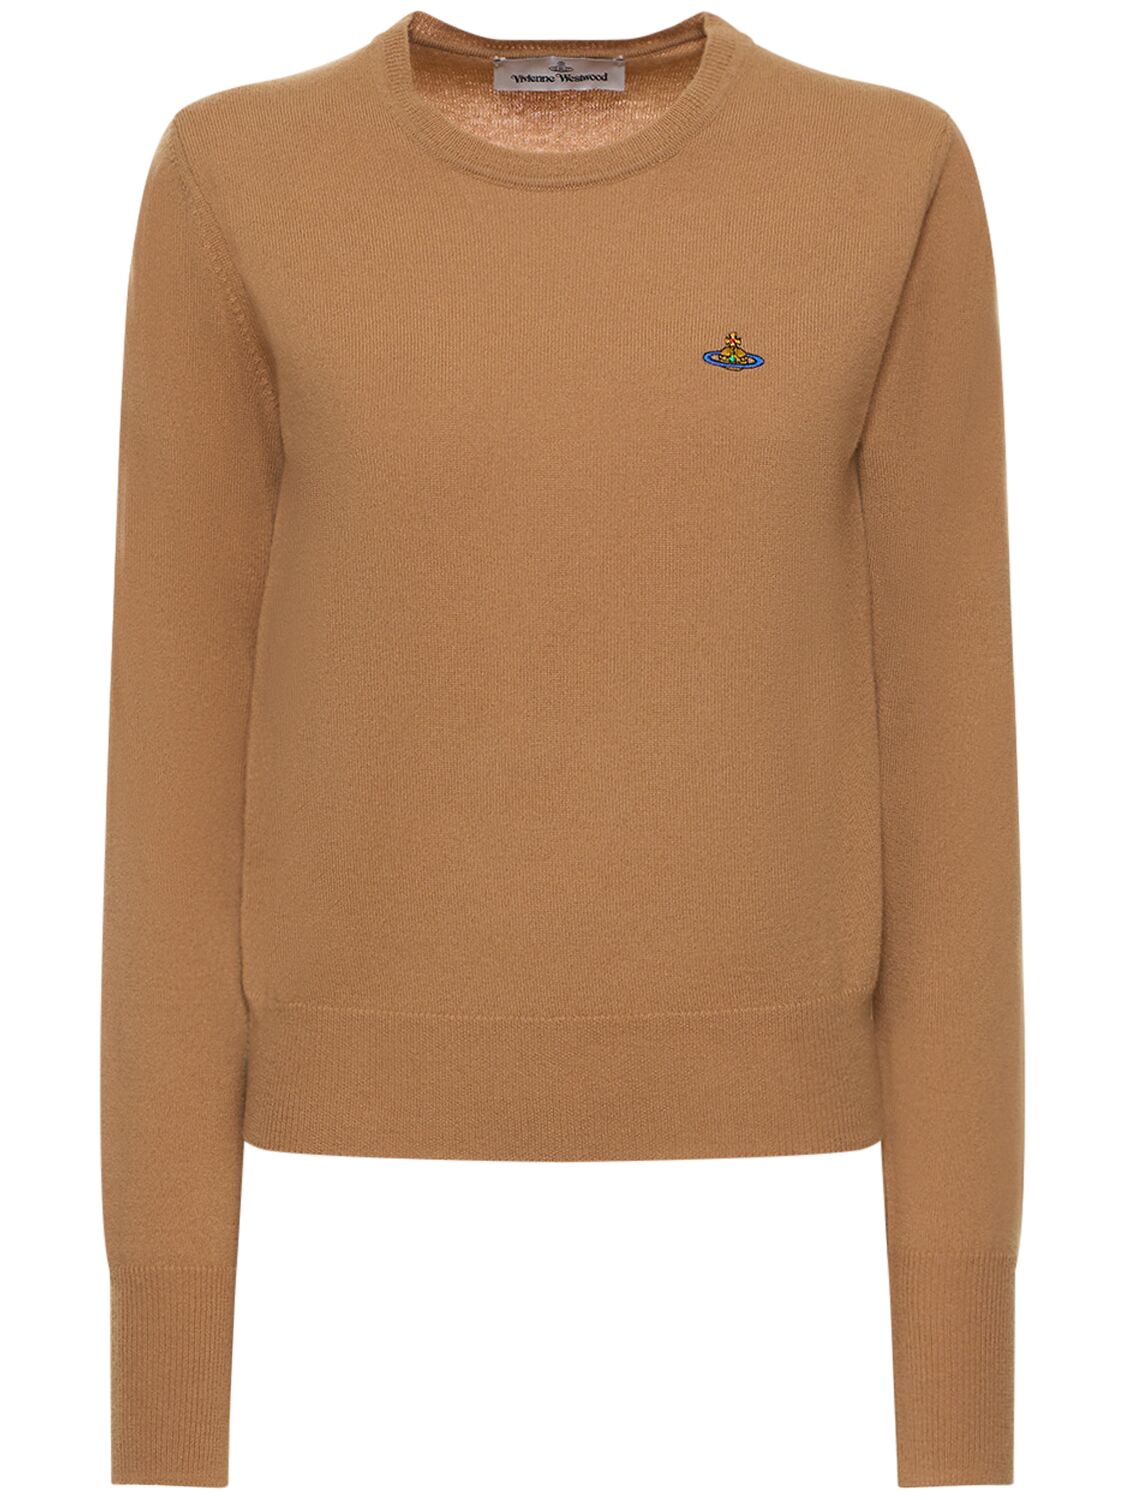 Vivienne Westwood Bea Wool & Cashmere Logo Sweater In Camel